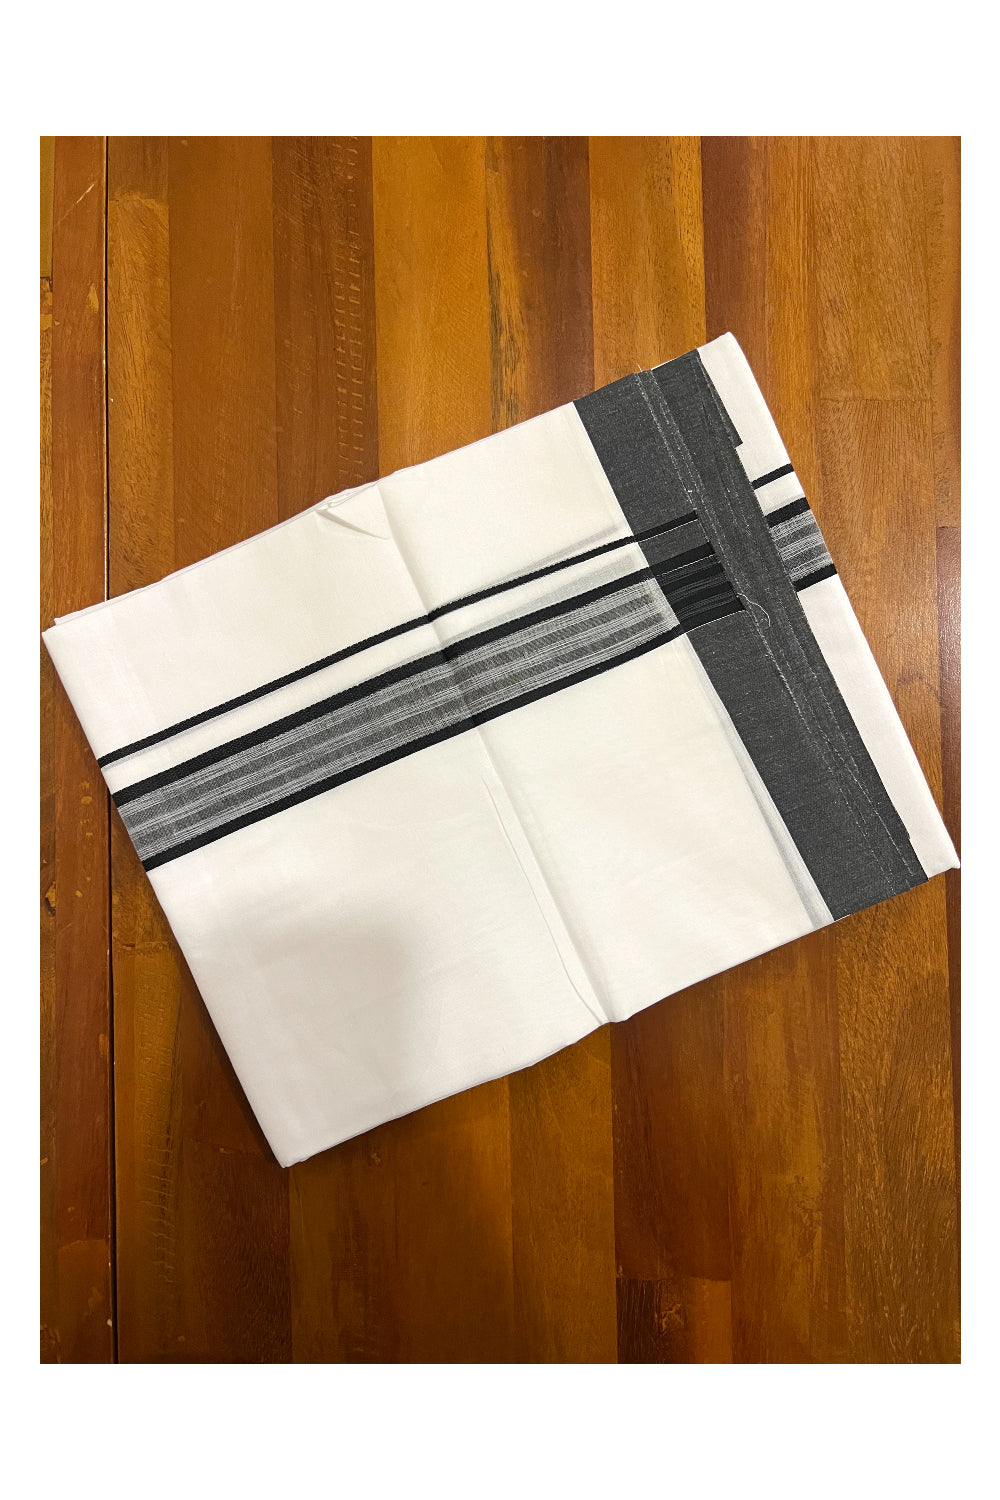 Pure White Cotton Double Mundu with Black Border (South Indian Dhoti)